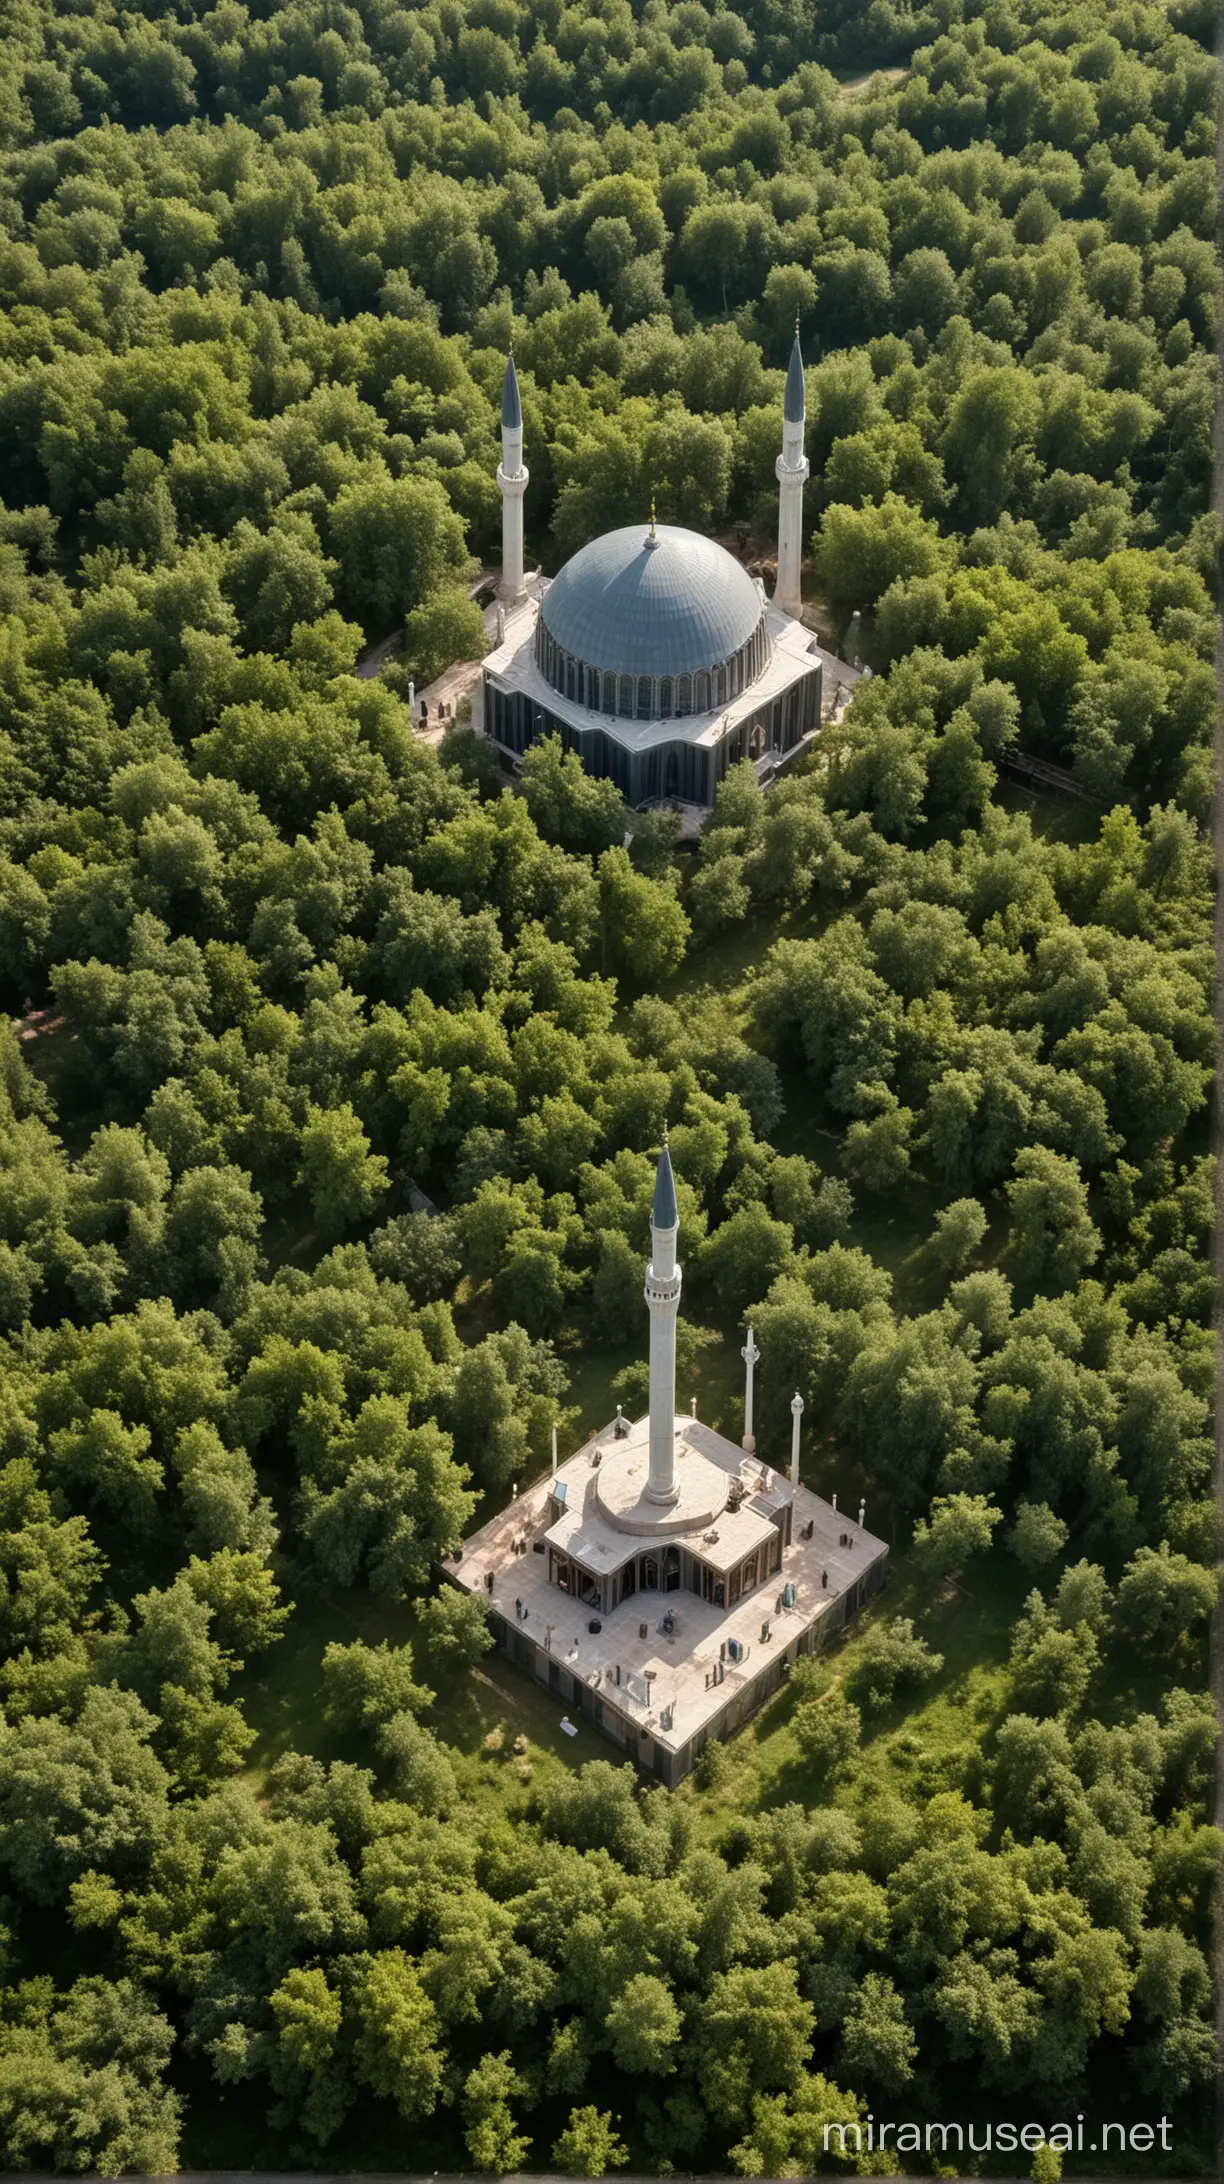 A mosque in the heart of trees, in an orchard, in an exciting world